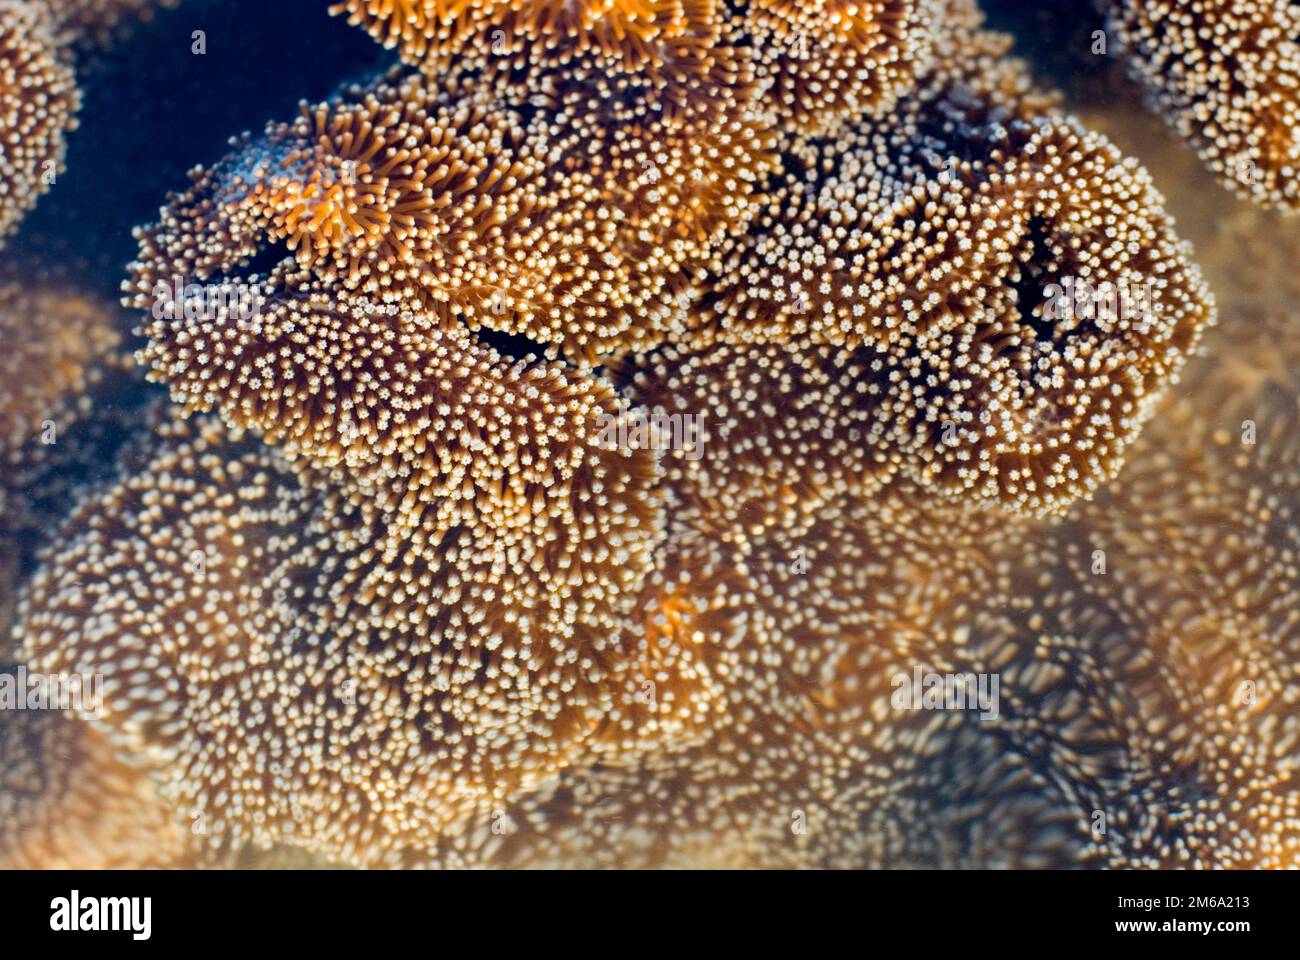 Leather coral polys Stock Photo